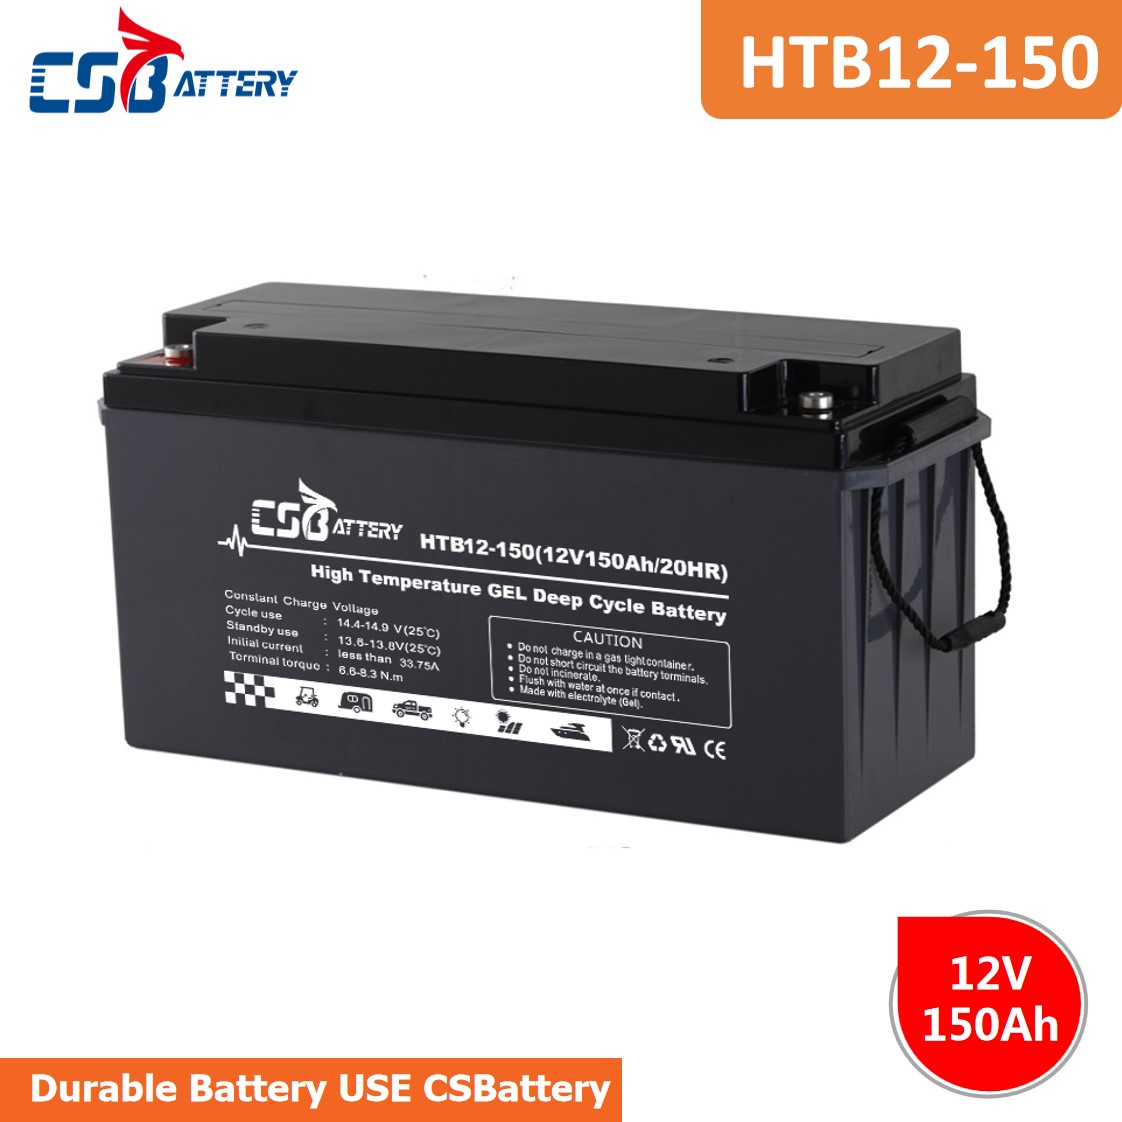 CSBattery 12V 150Ah strong starting performance GEL Battery for Electric-power/Emergency-systems/Booster-Pumps 